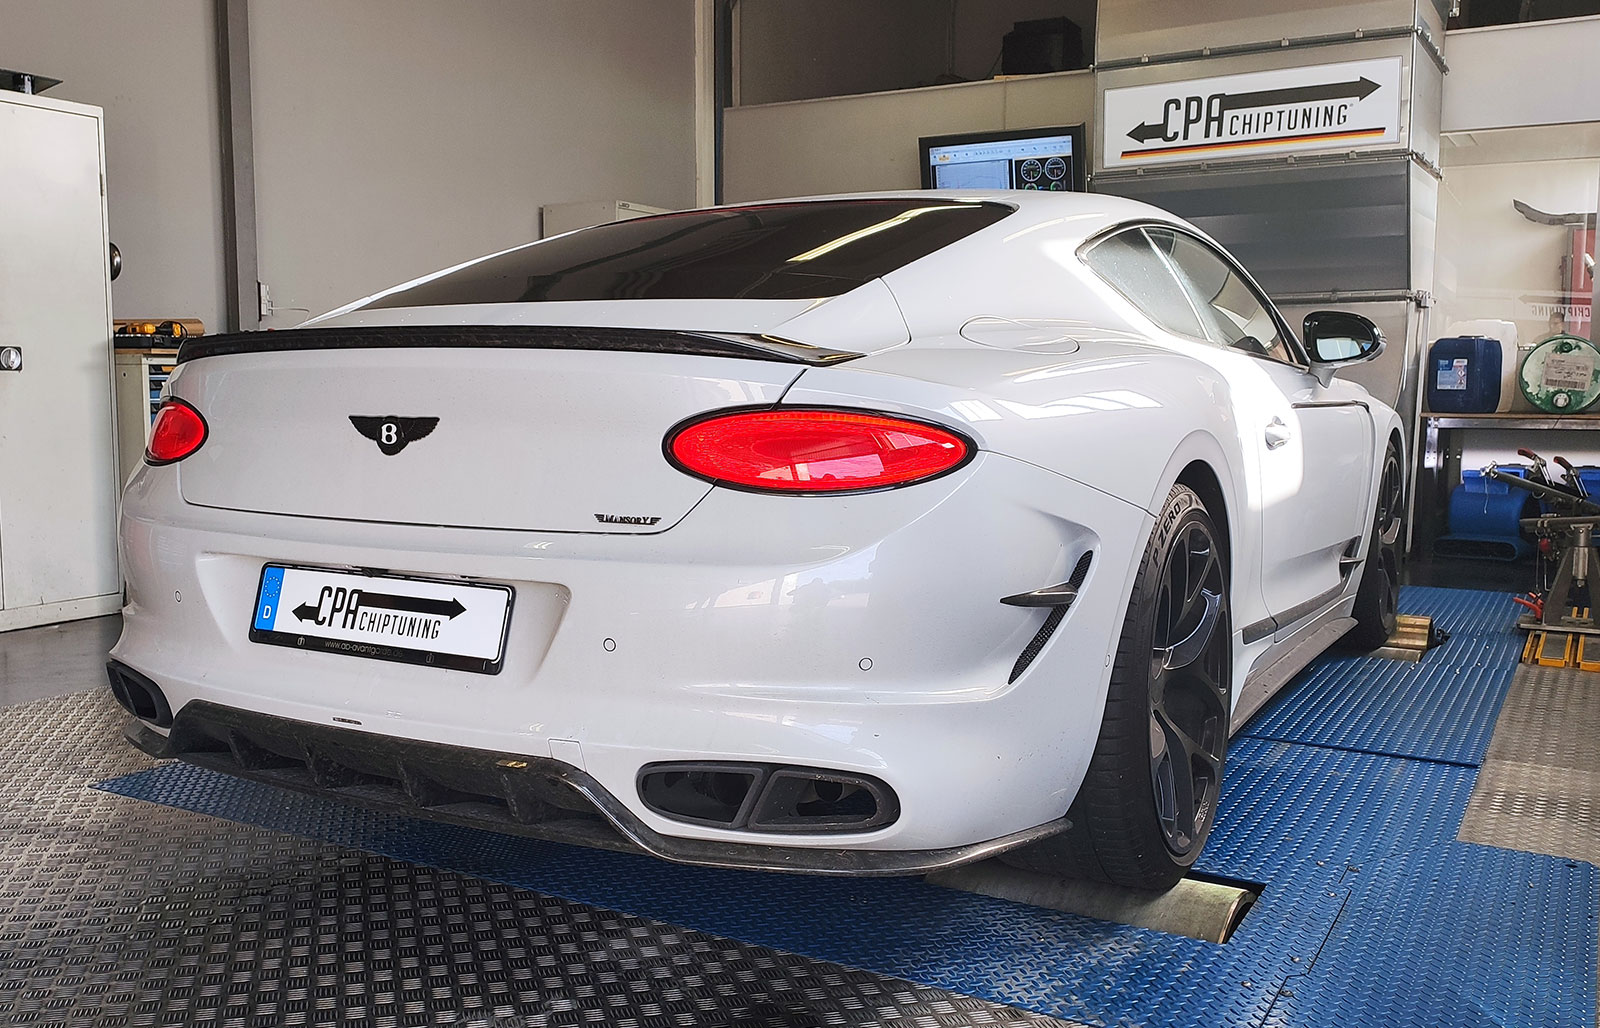 On the dyno: Bentley Continental GT V8